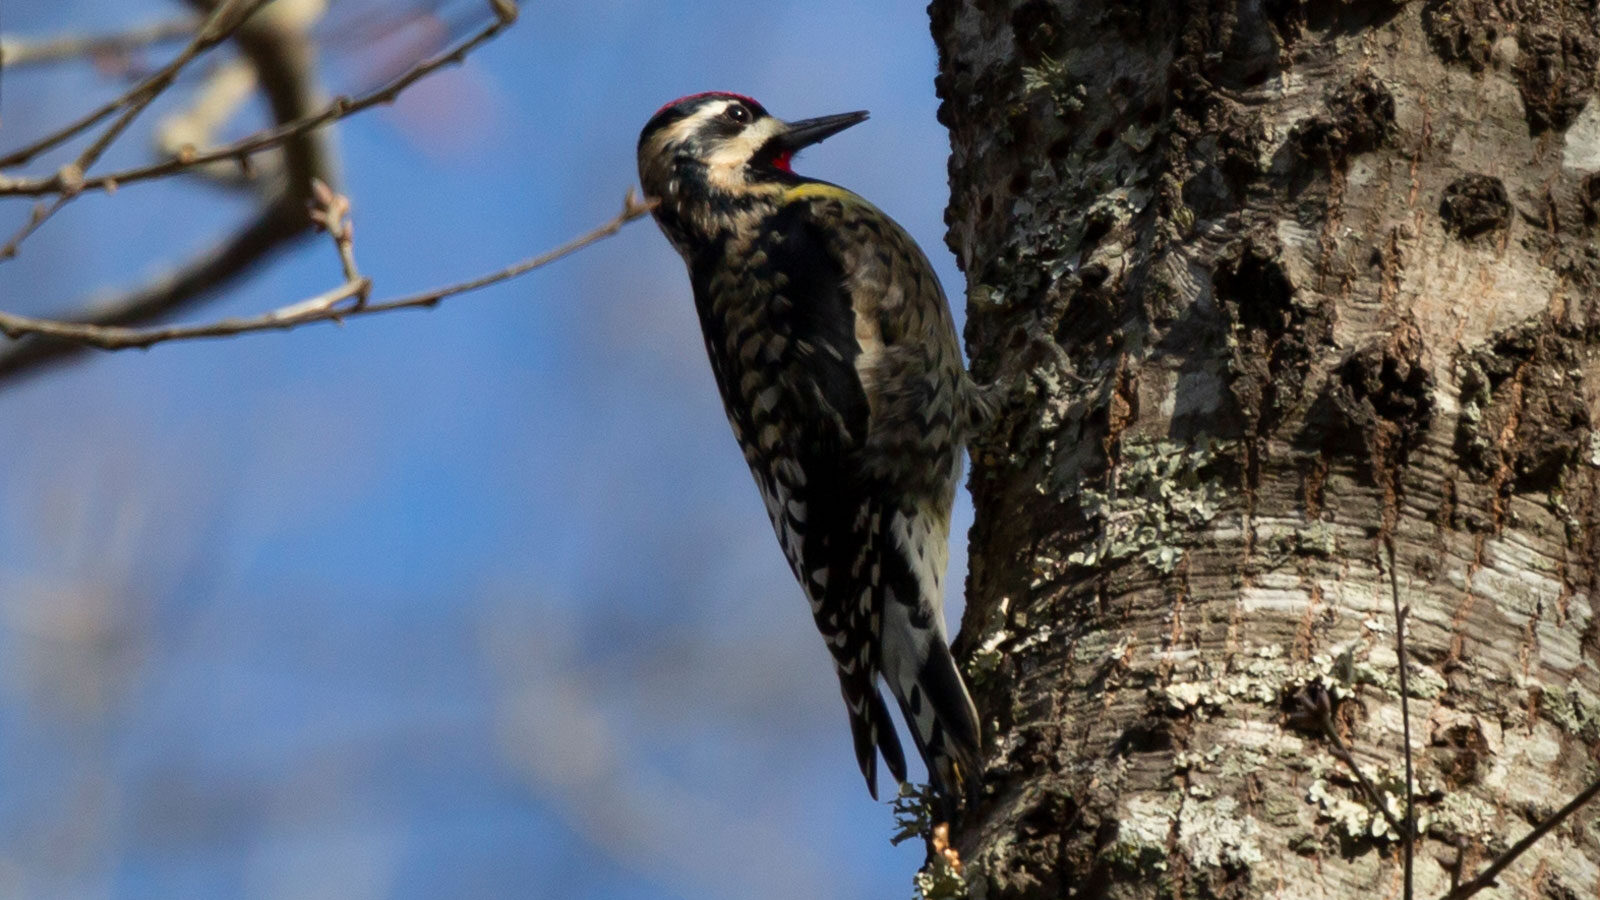 Male yellow-bellied sapsucker perched on a tree trunk